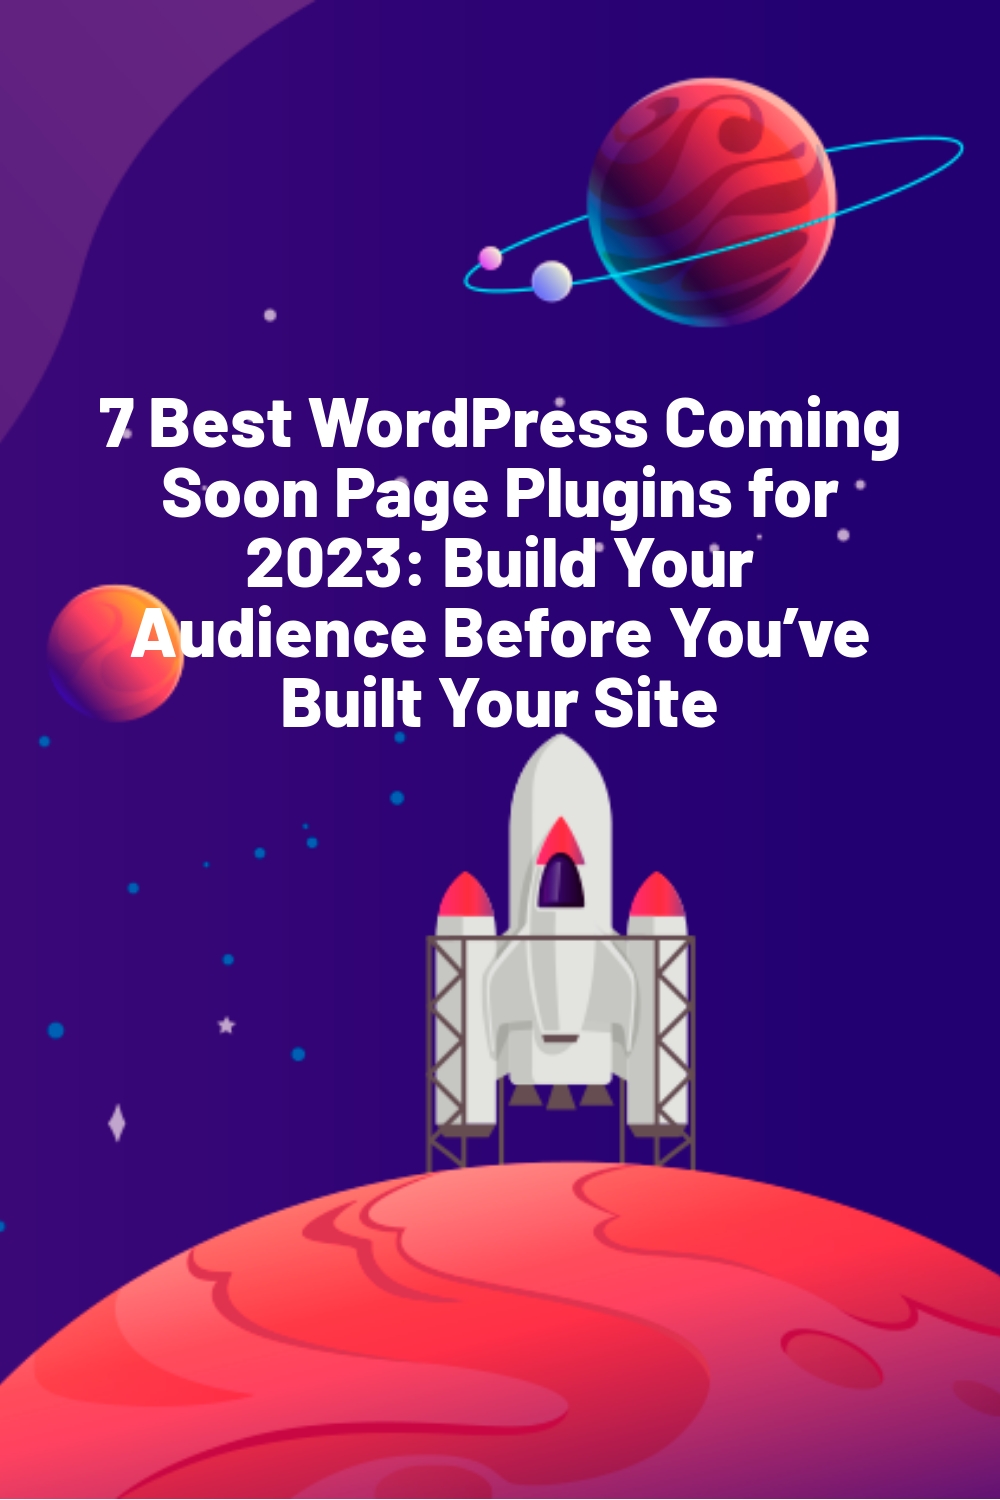 7 Best WordPress Coming Soon Page Plugins for 2023: Build Your Audience Before You’ve Built Your Site